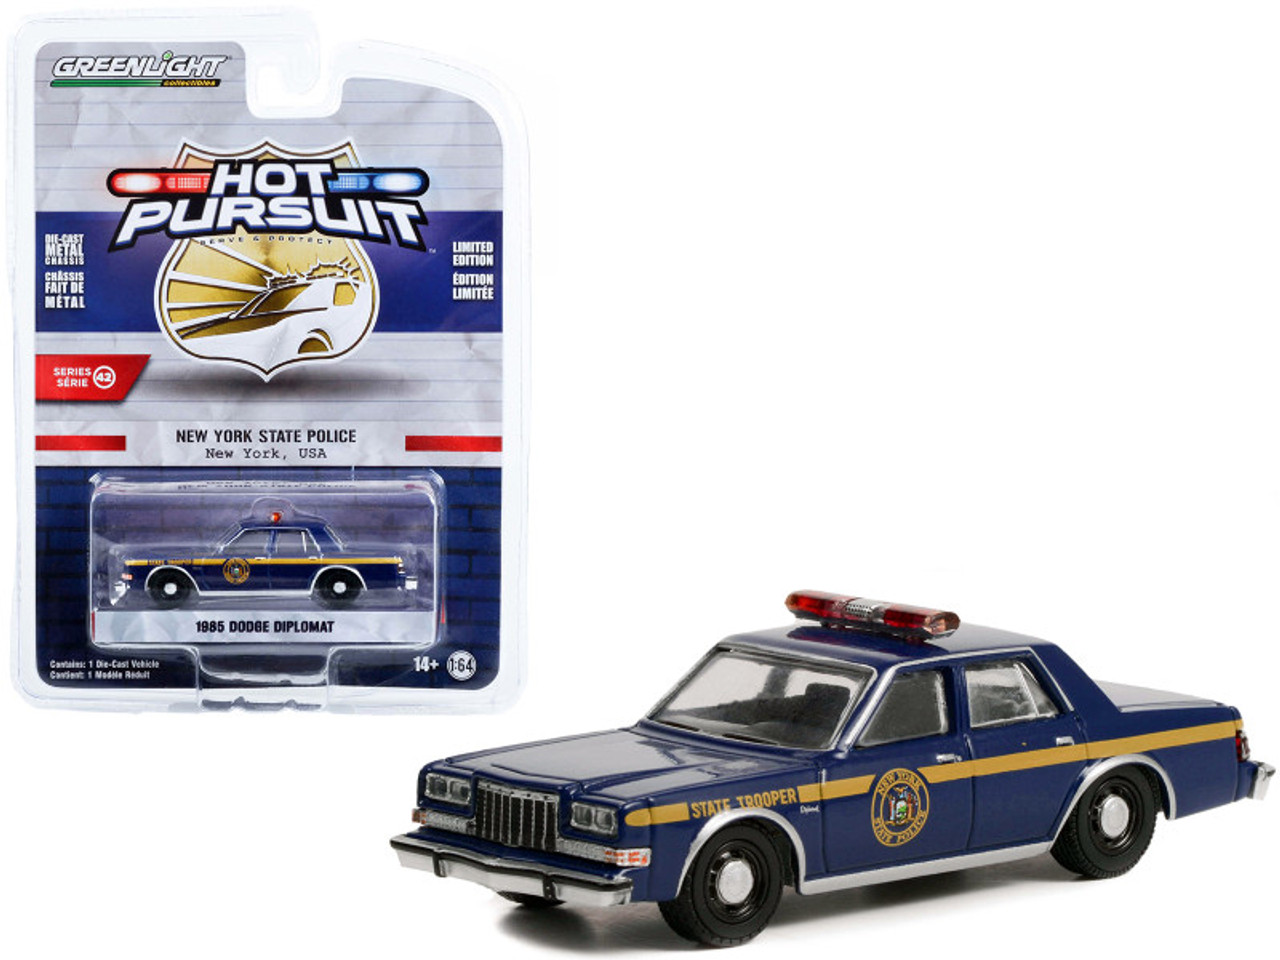 1985 Dodge Diplomat Police Dark Blue "New York State Police State Trooper" "Hot Pursuit" Series 42 1/64 Diecast Model Car by Greenlight